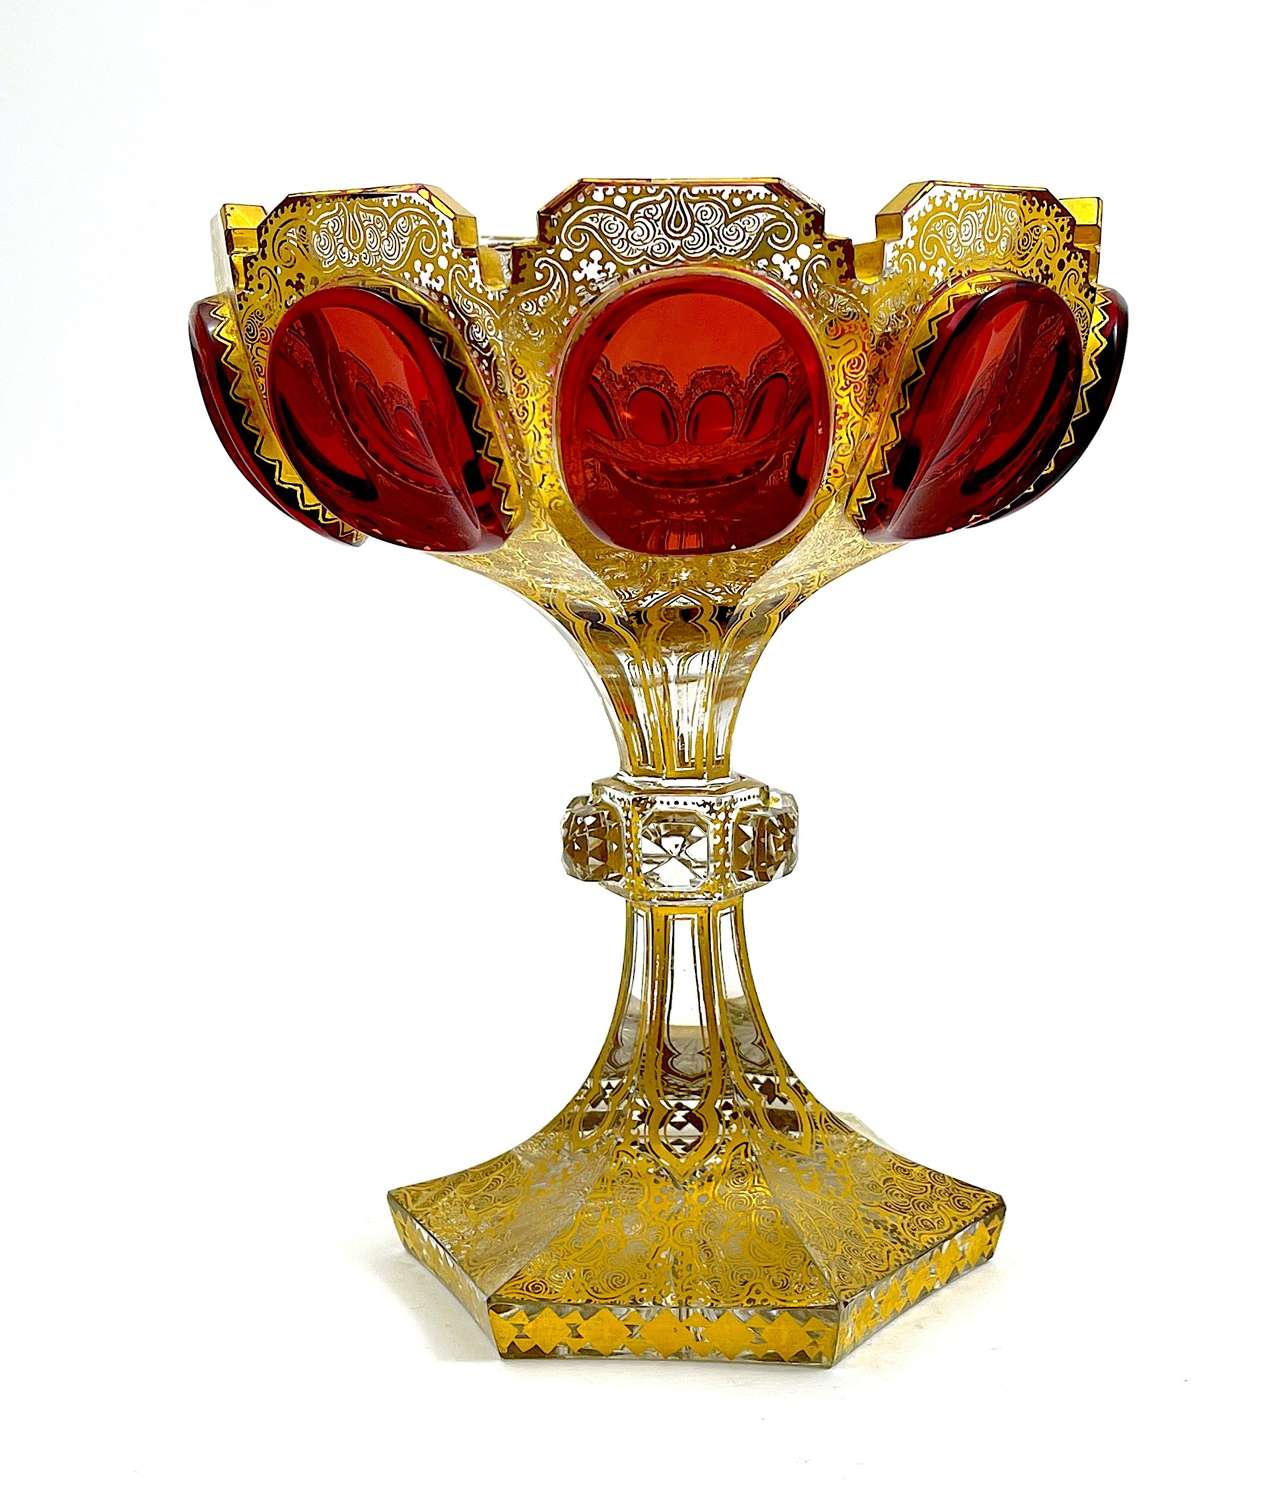 Antique Bohemian Glass Bowl  Decorated with Red Jewel Cabouchon Panels